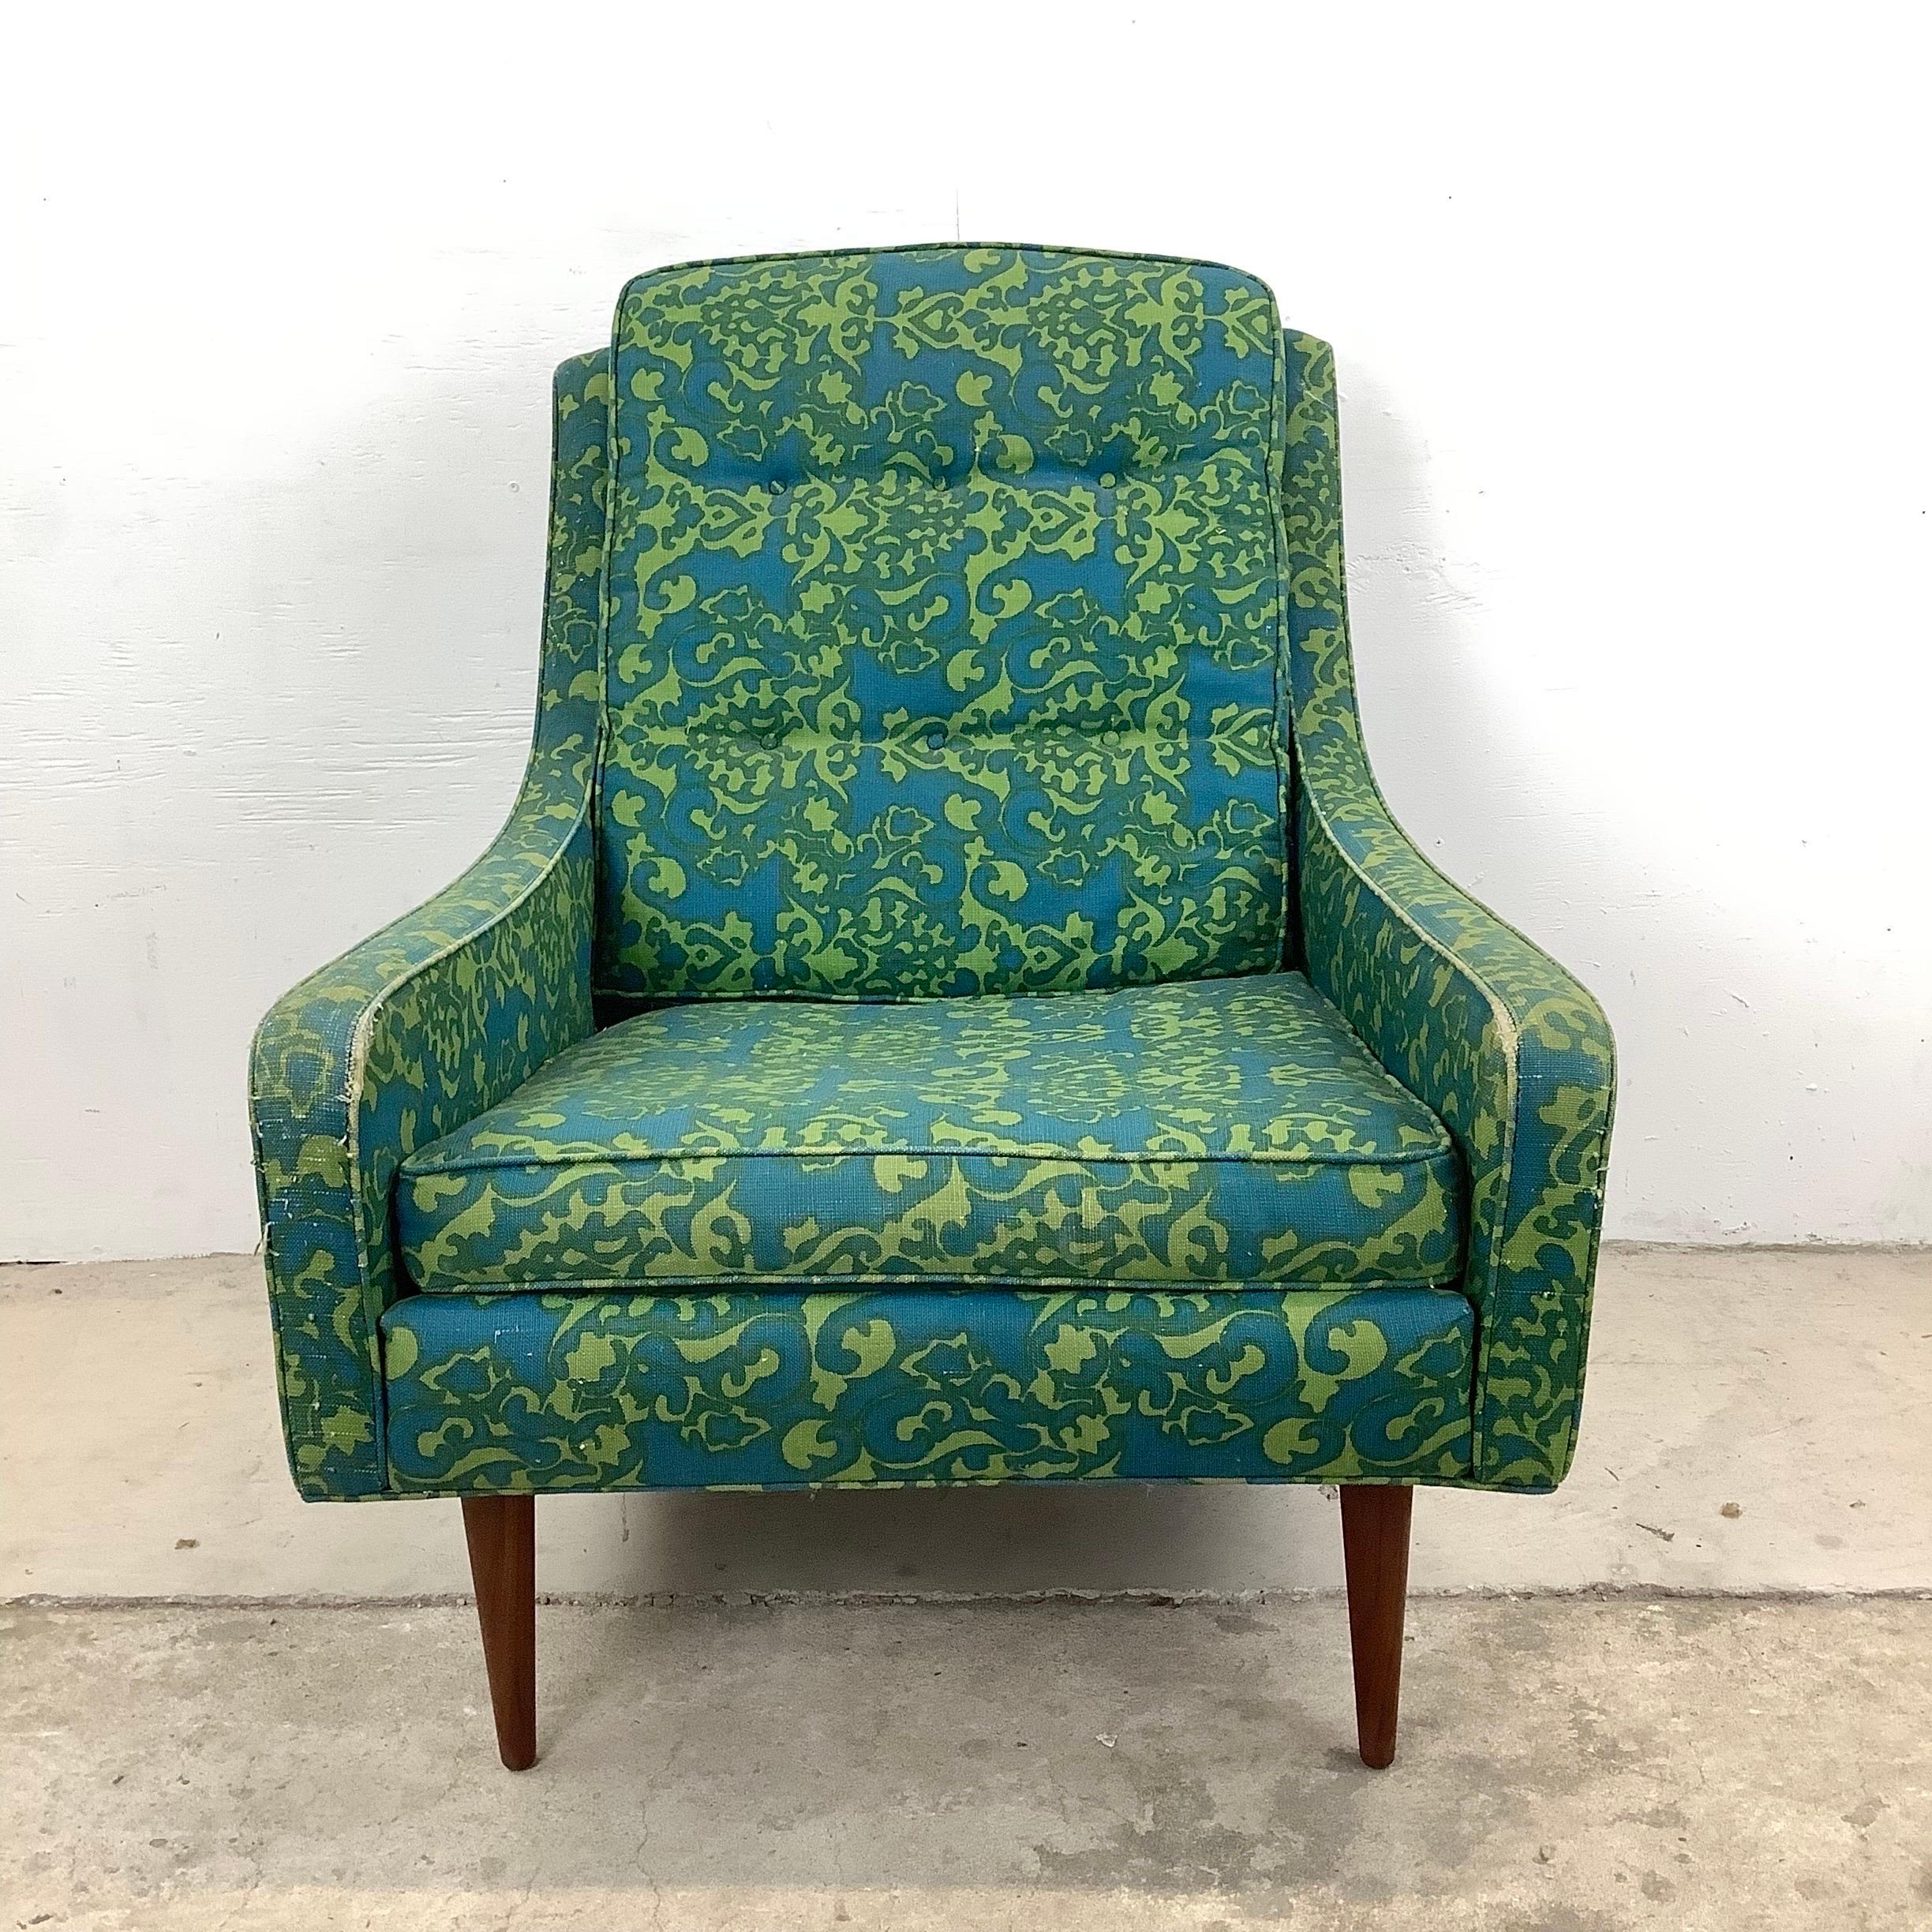 Comfortable and stylish Mid-Century Modern design of this vintage lounge chair make it a vibrant addition to any interior. 

?Dimensions: 27.5W 33D 35.5H 16SH 19.5AH.

Condition: age appropriate wear, vintage fabric worn and soiled, some